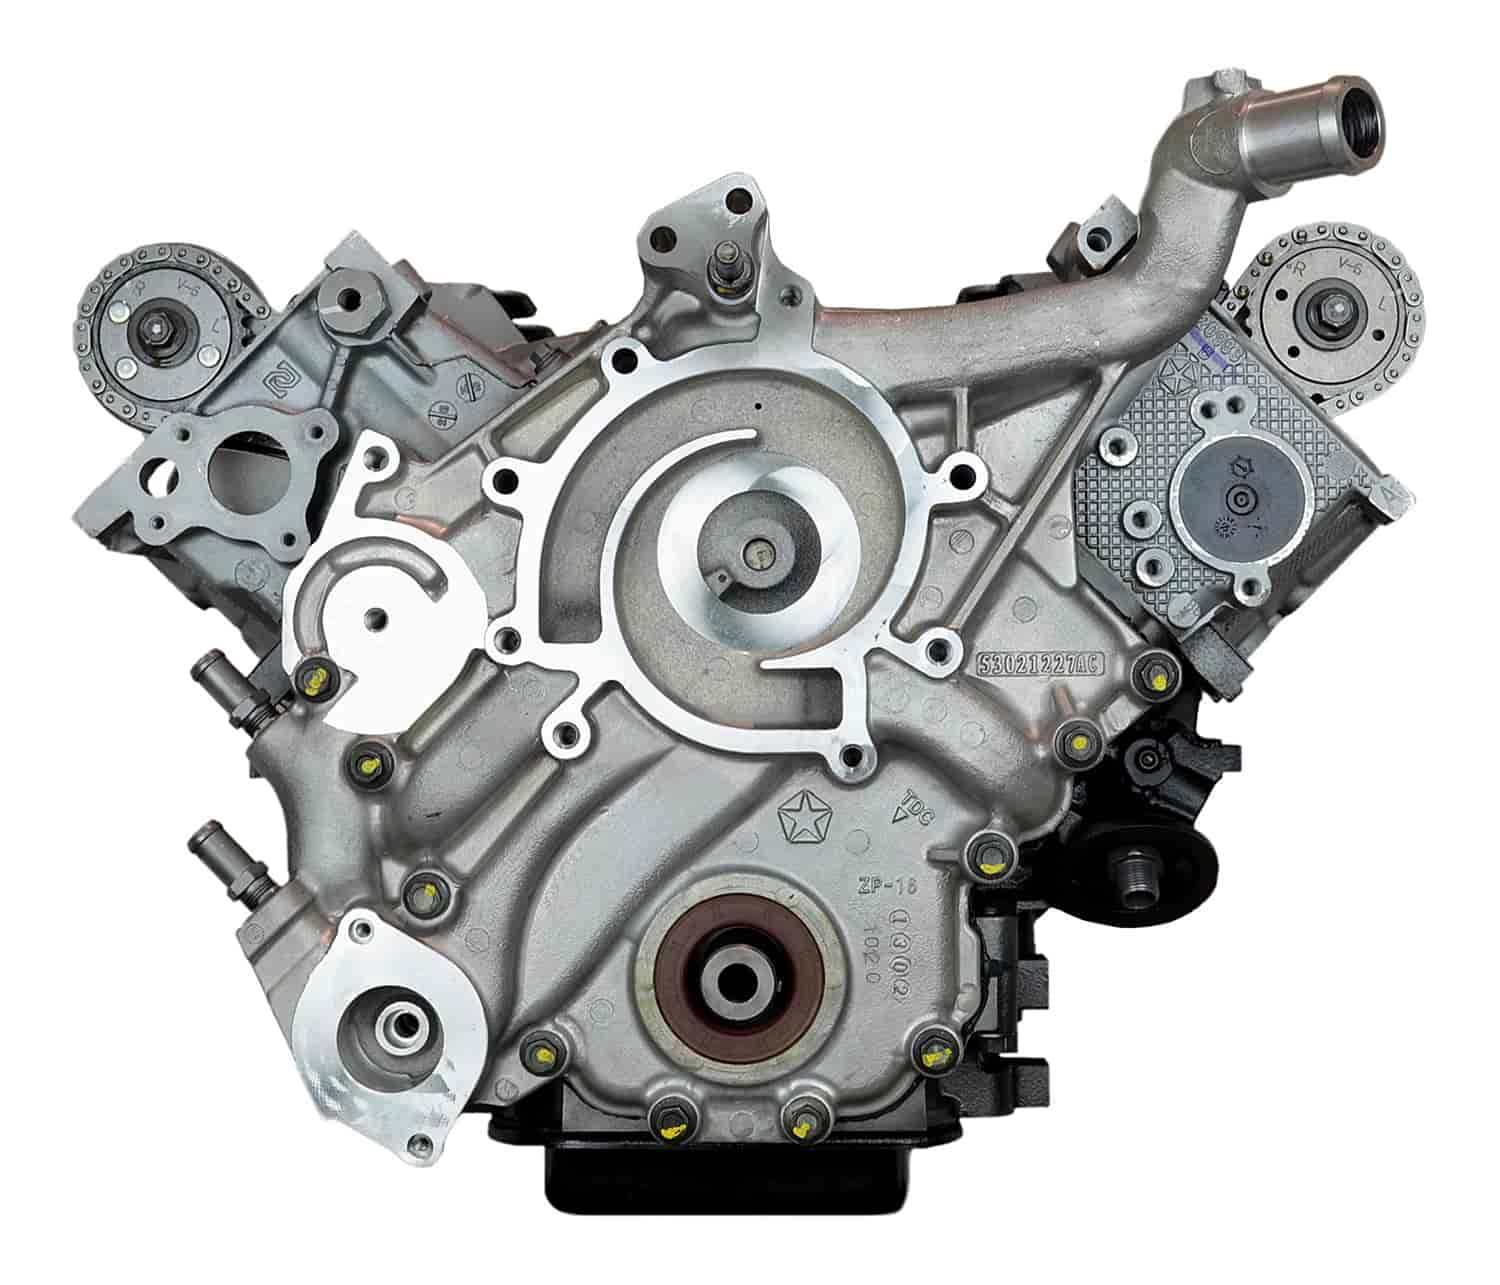 Remanufactured Crate Engine for 2002-2003 Dodge/Jeep with 3.7L